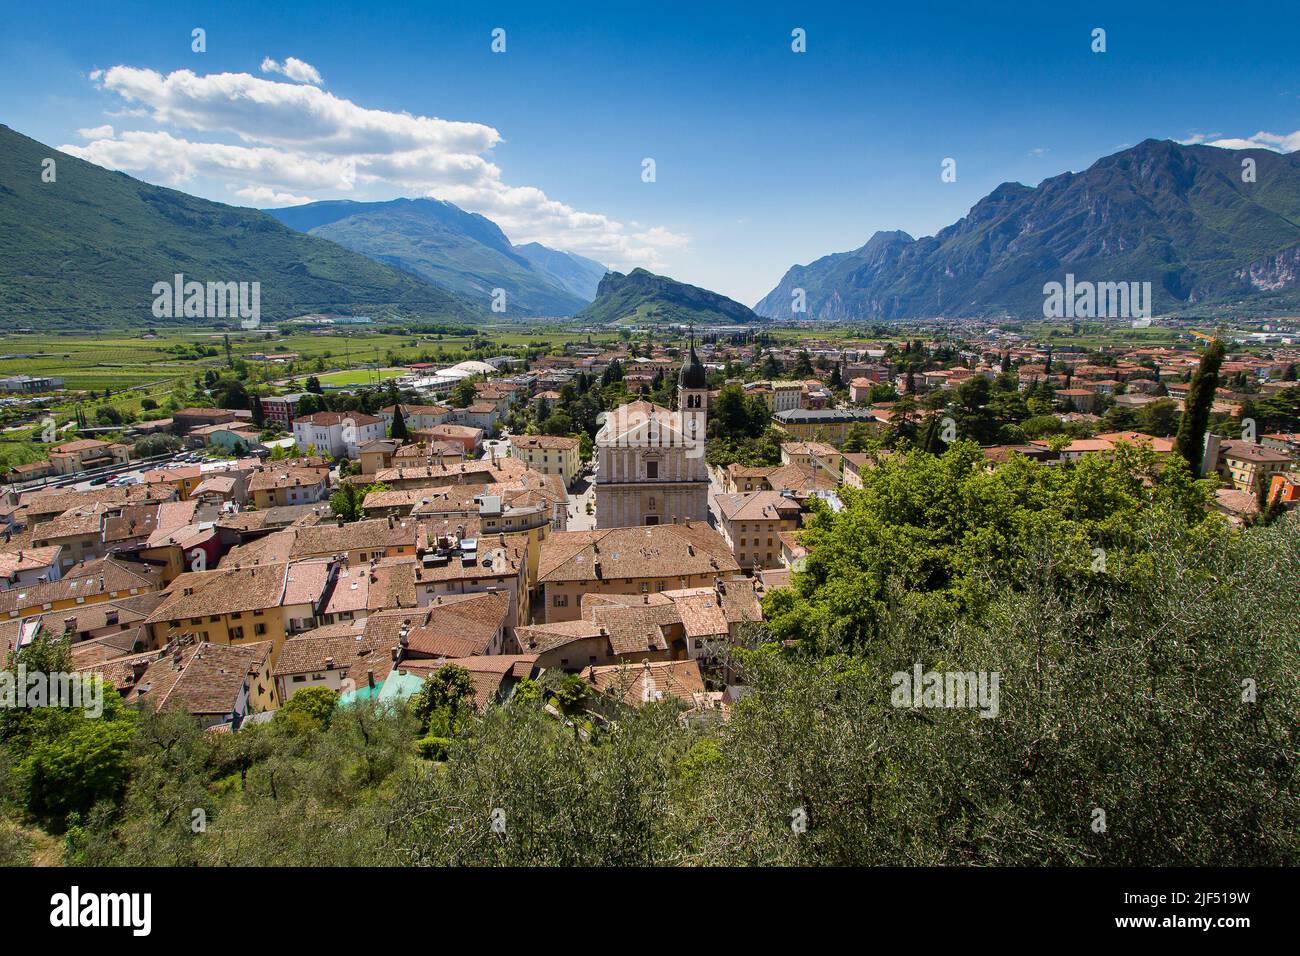 Overview of the village of Arco north of Lago di Garda in Italy on a beatiful summer day Stock Photo